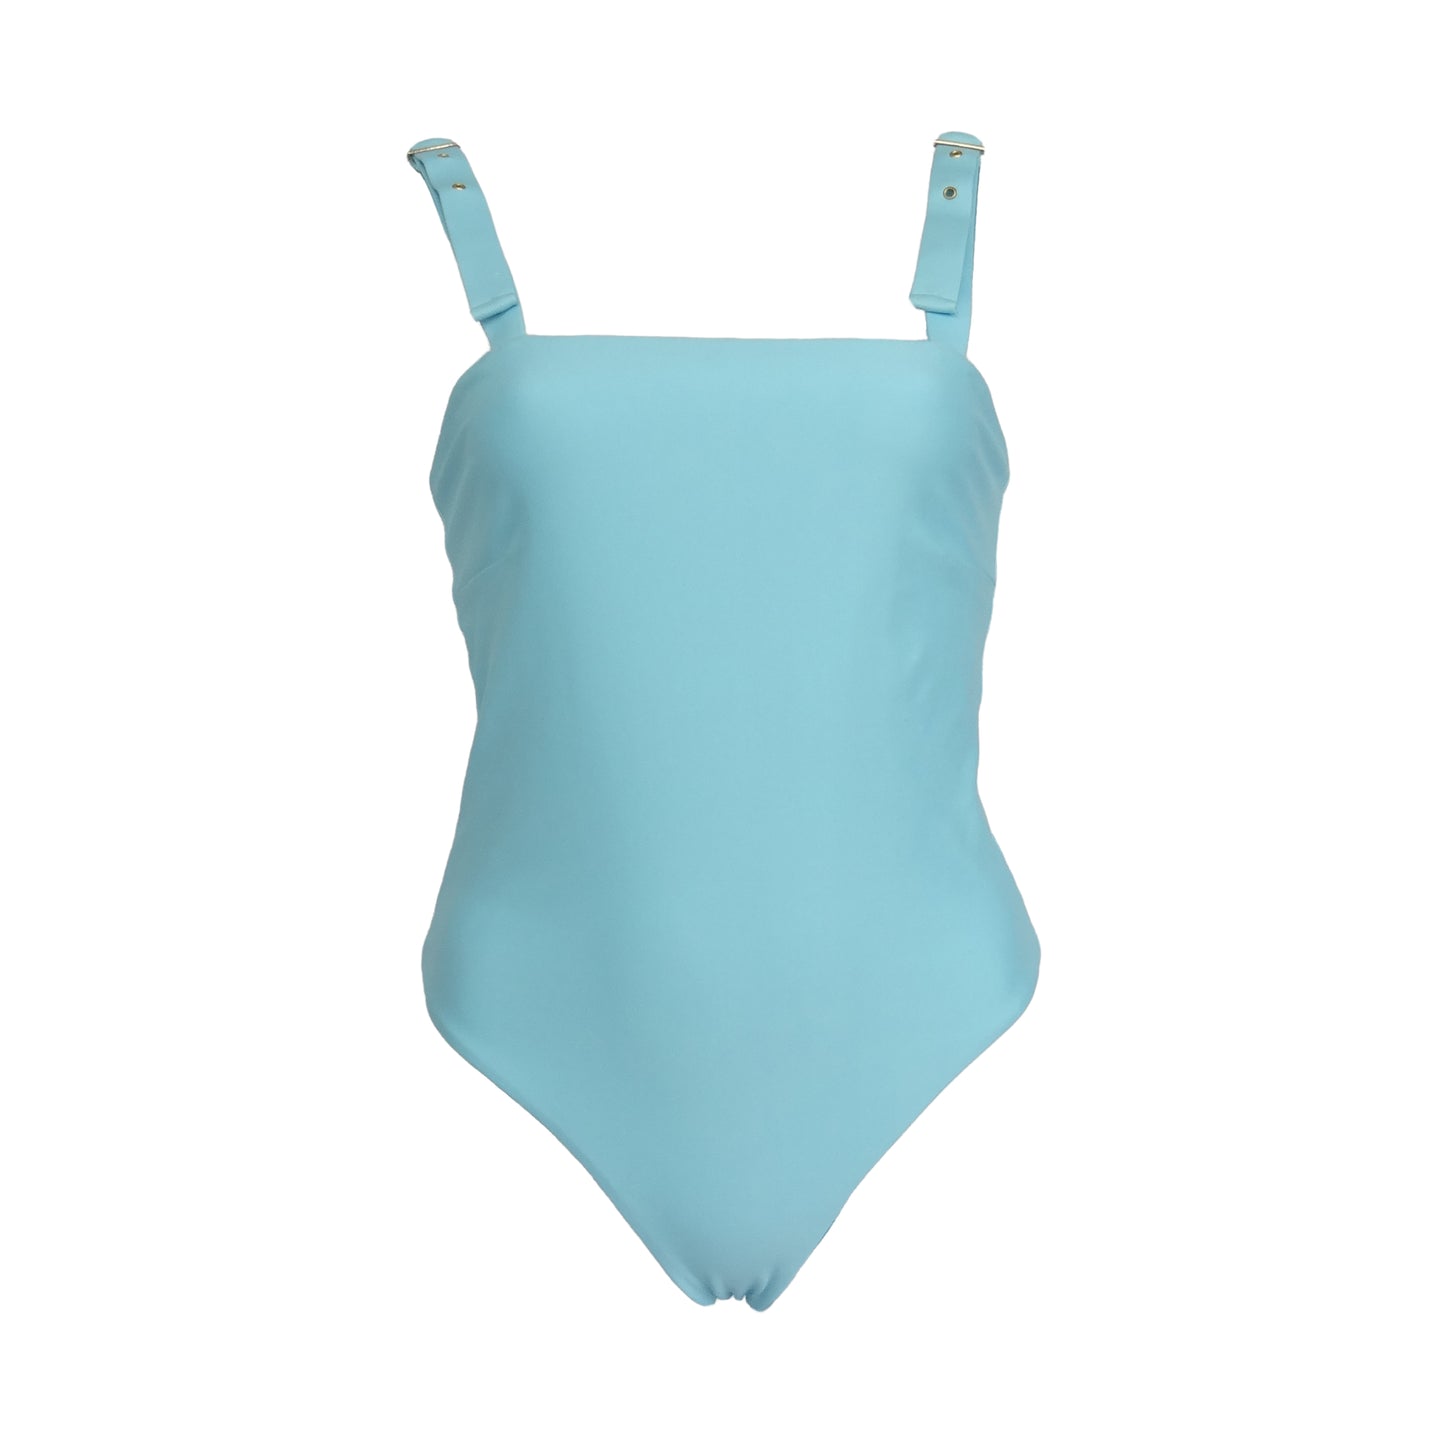 Ocean blue straight square neck one piece swimsuit with adjustable gold belt buckle shoulder straps, high cut legs and cheeky bum coverage. 